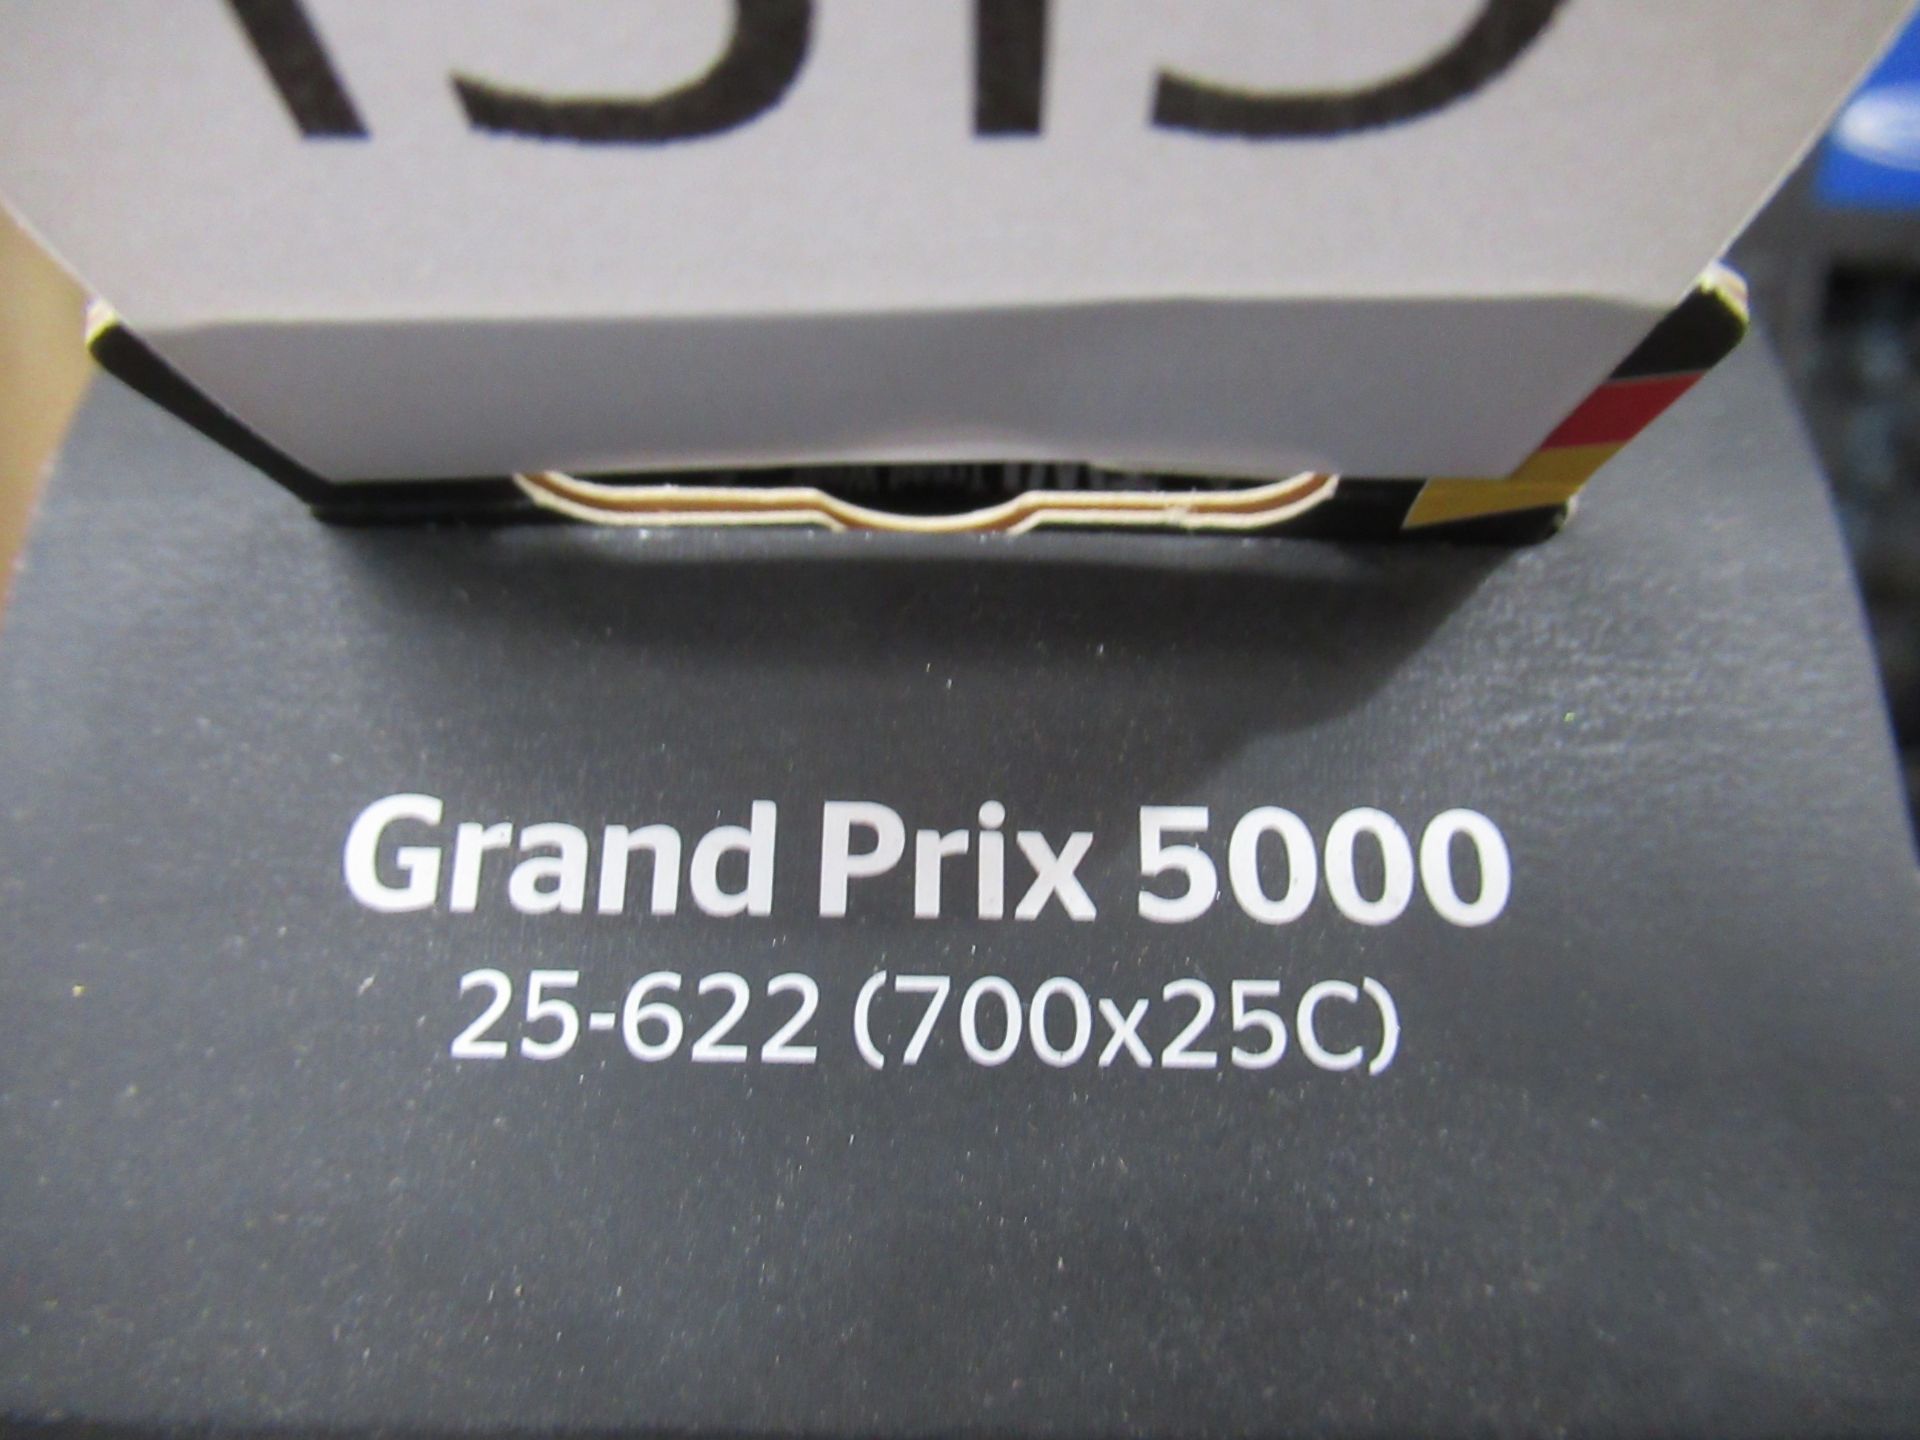 3 x Continental Grand Prix 5000 tyres - 1 x 700x25c; 1 x 700x28c and 1 x 700 x 30c (total RRP£239.85 - Image 2 of 4